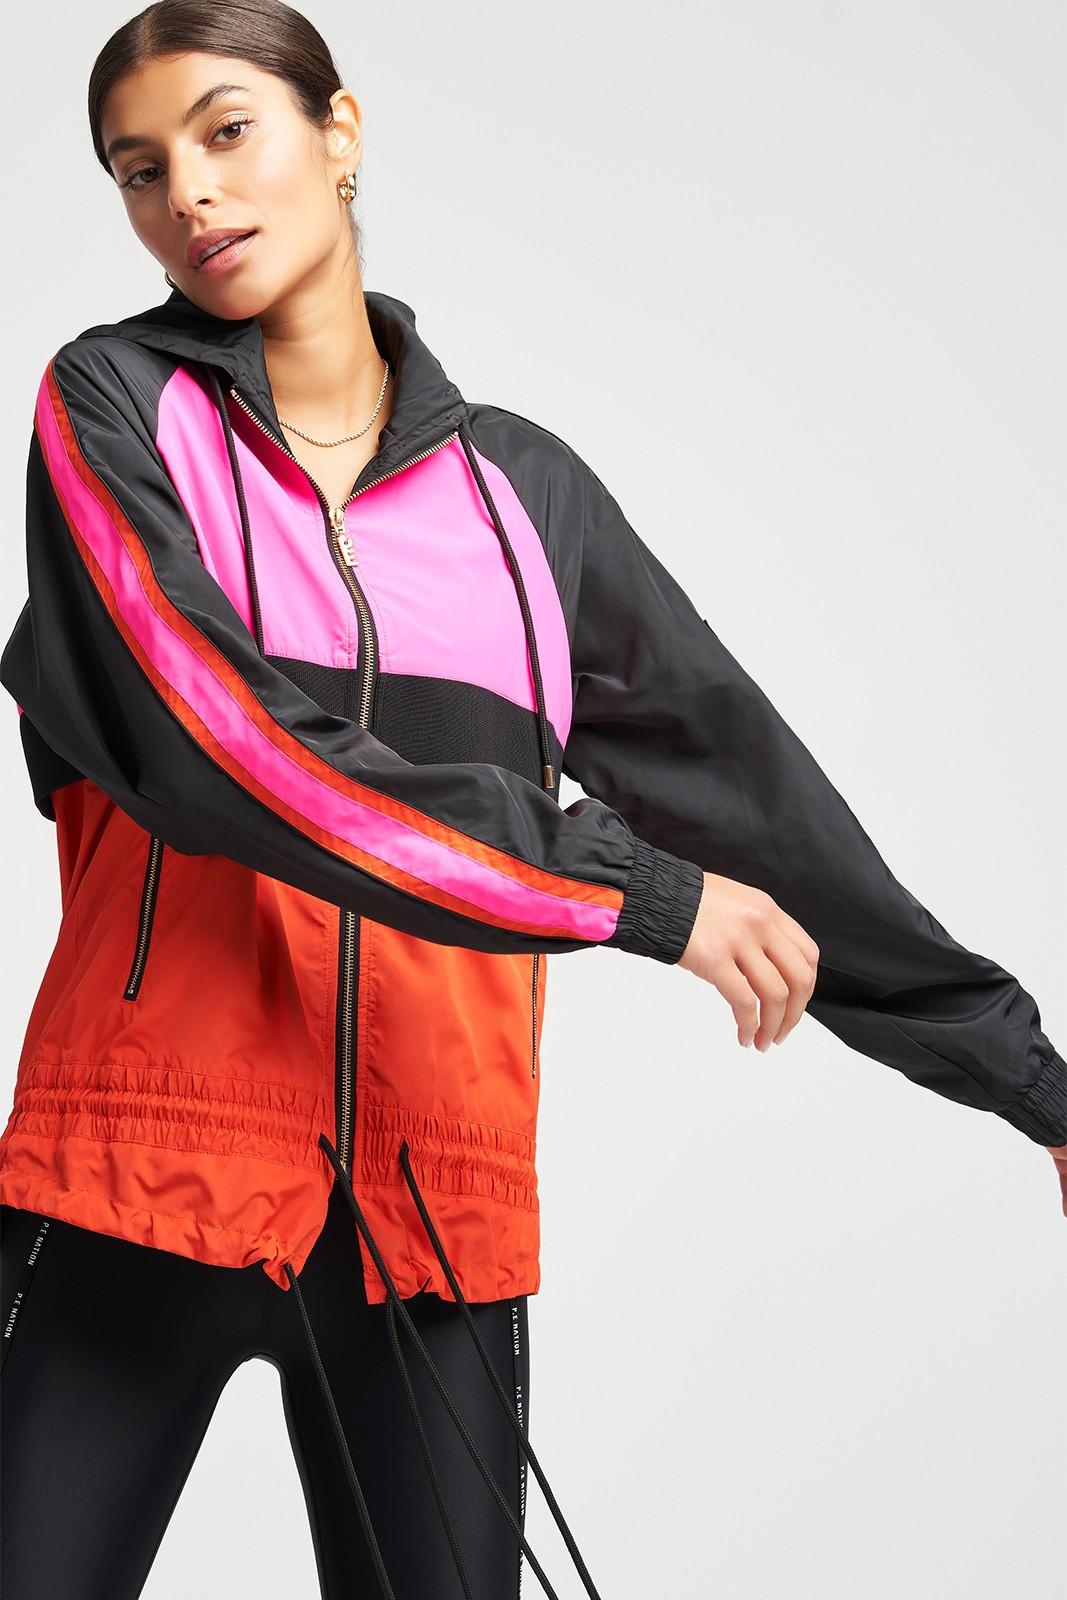 P.E Nation Synthetic Man Down Jacket in Pink Bright (Pink) - Lyst